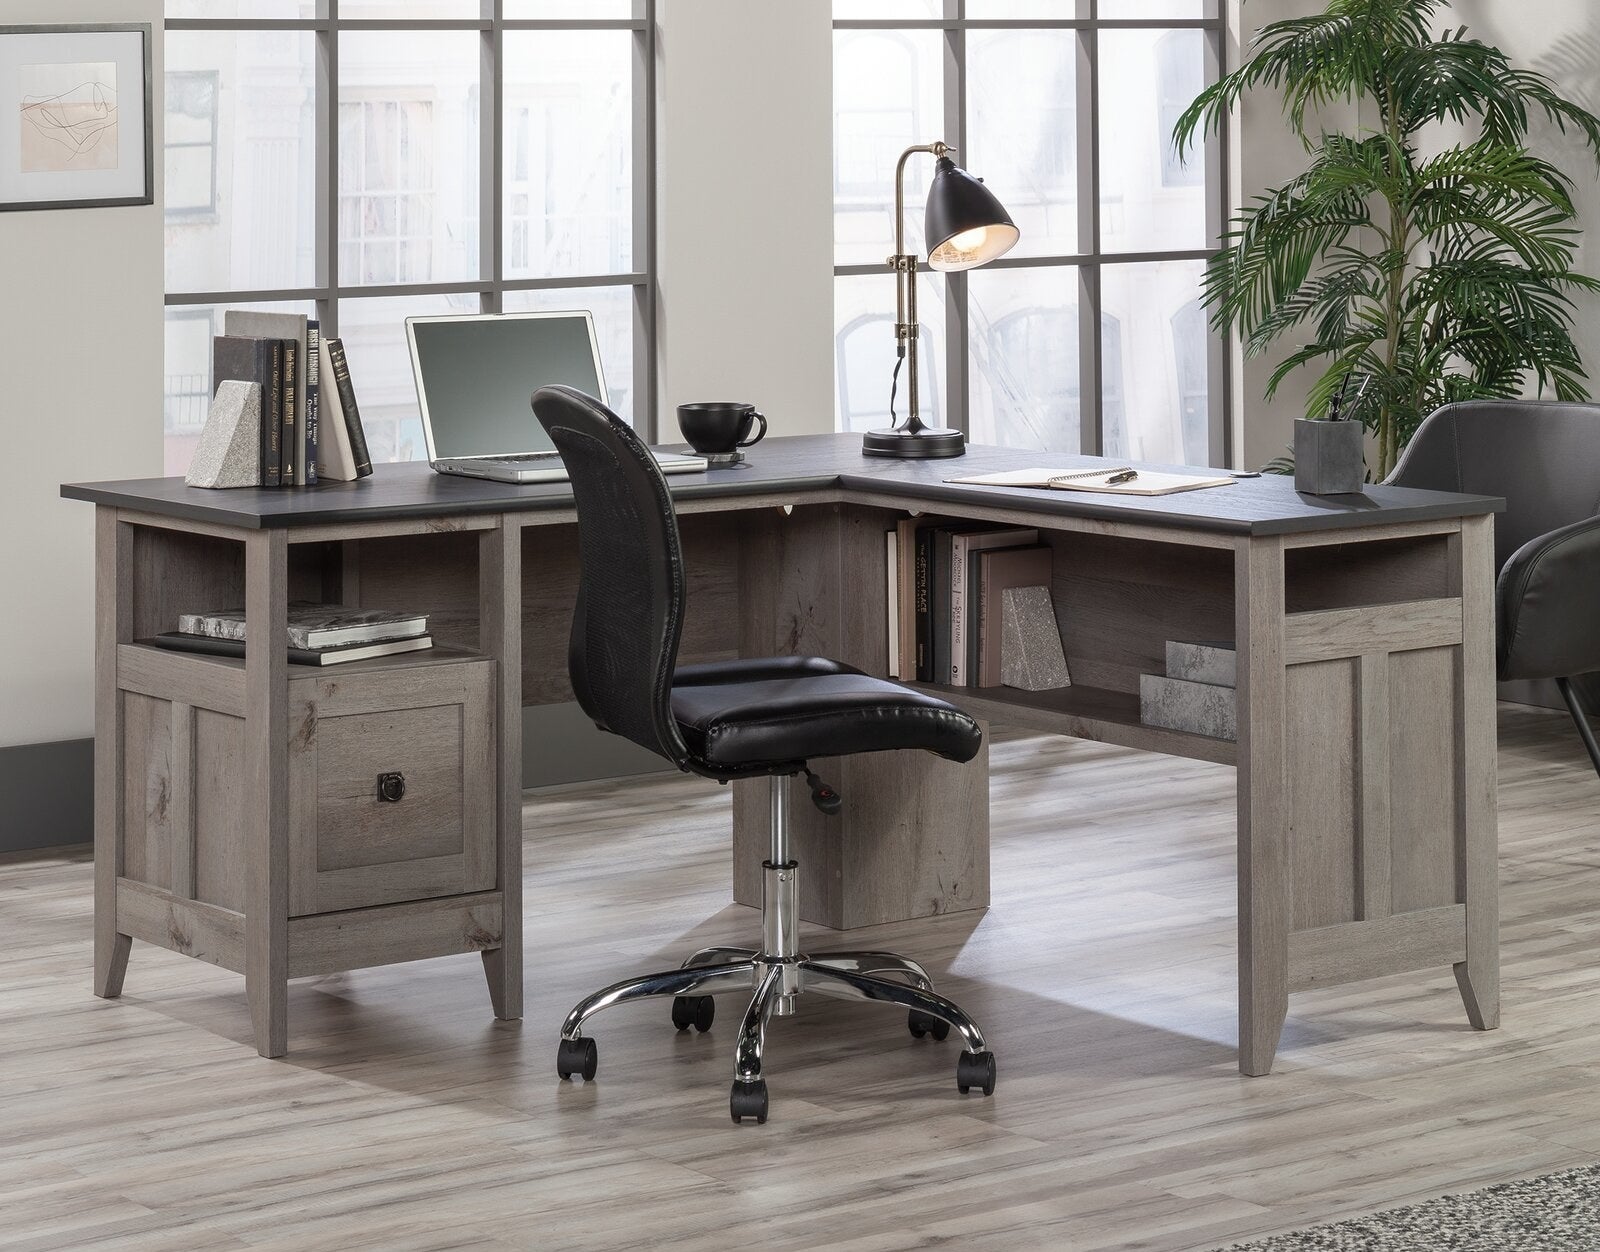 A dark gray and black L-shaped desk with interior shelf and drawer